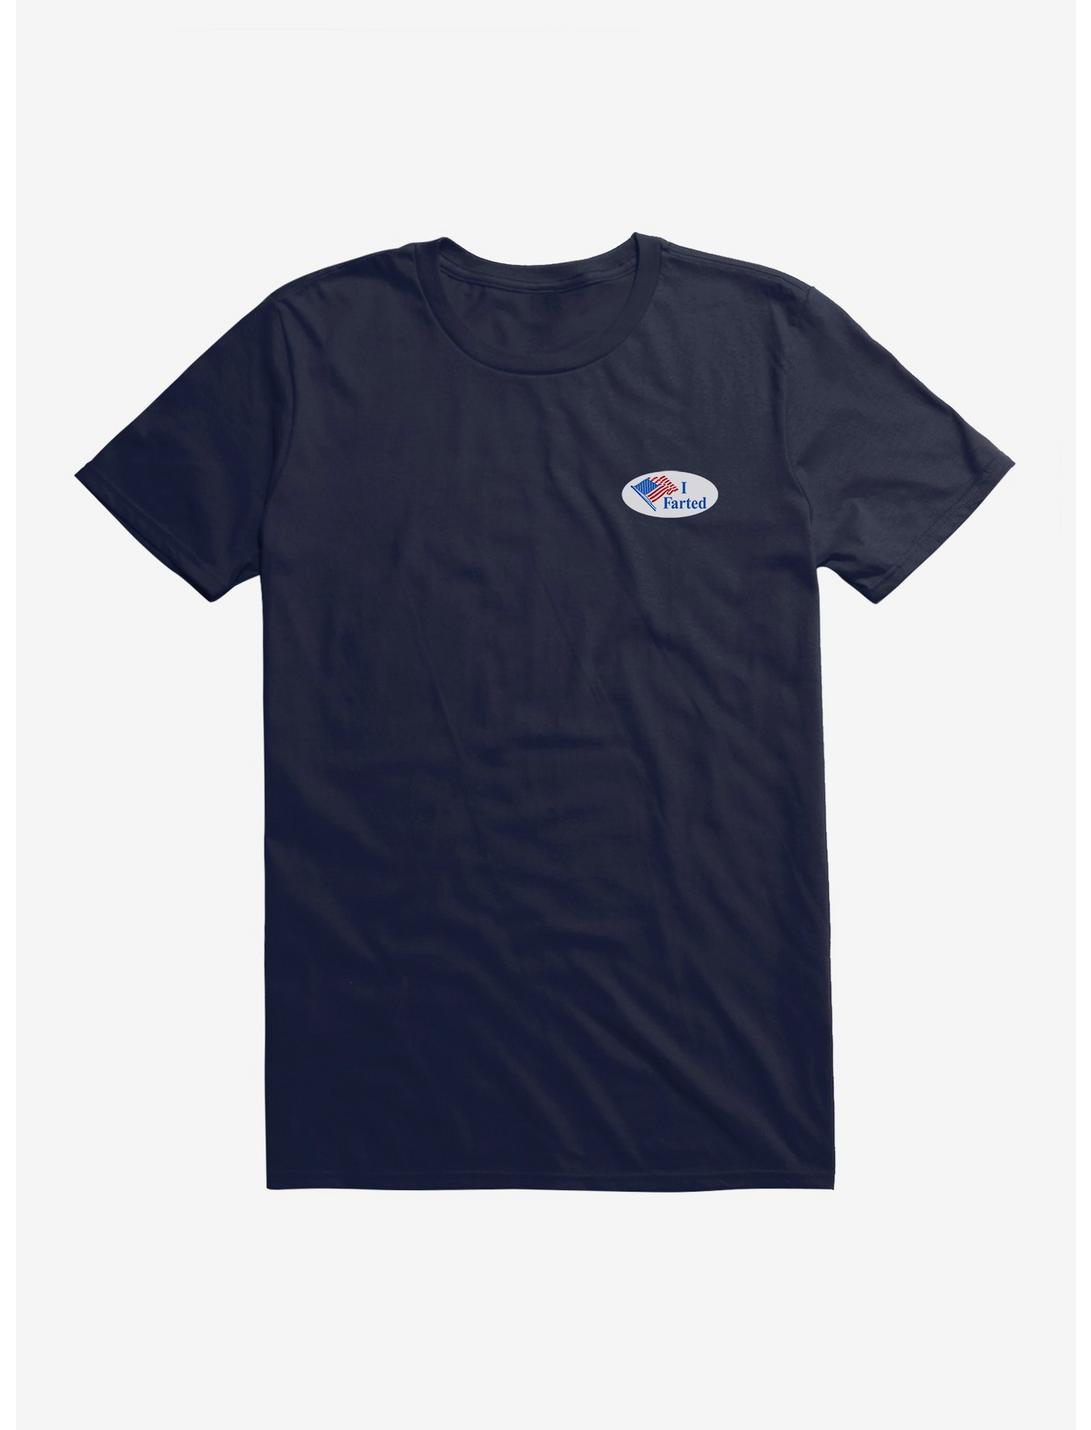 Hot Topic Voting Humor I Farted T-Shirt, NAVY, hi-res